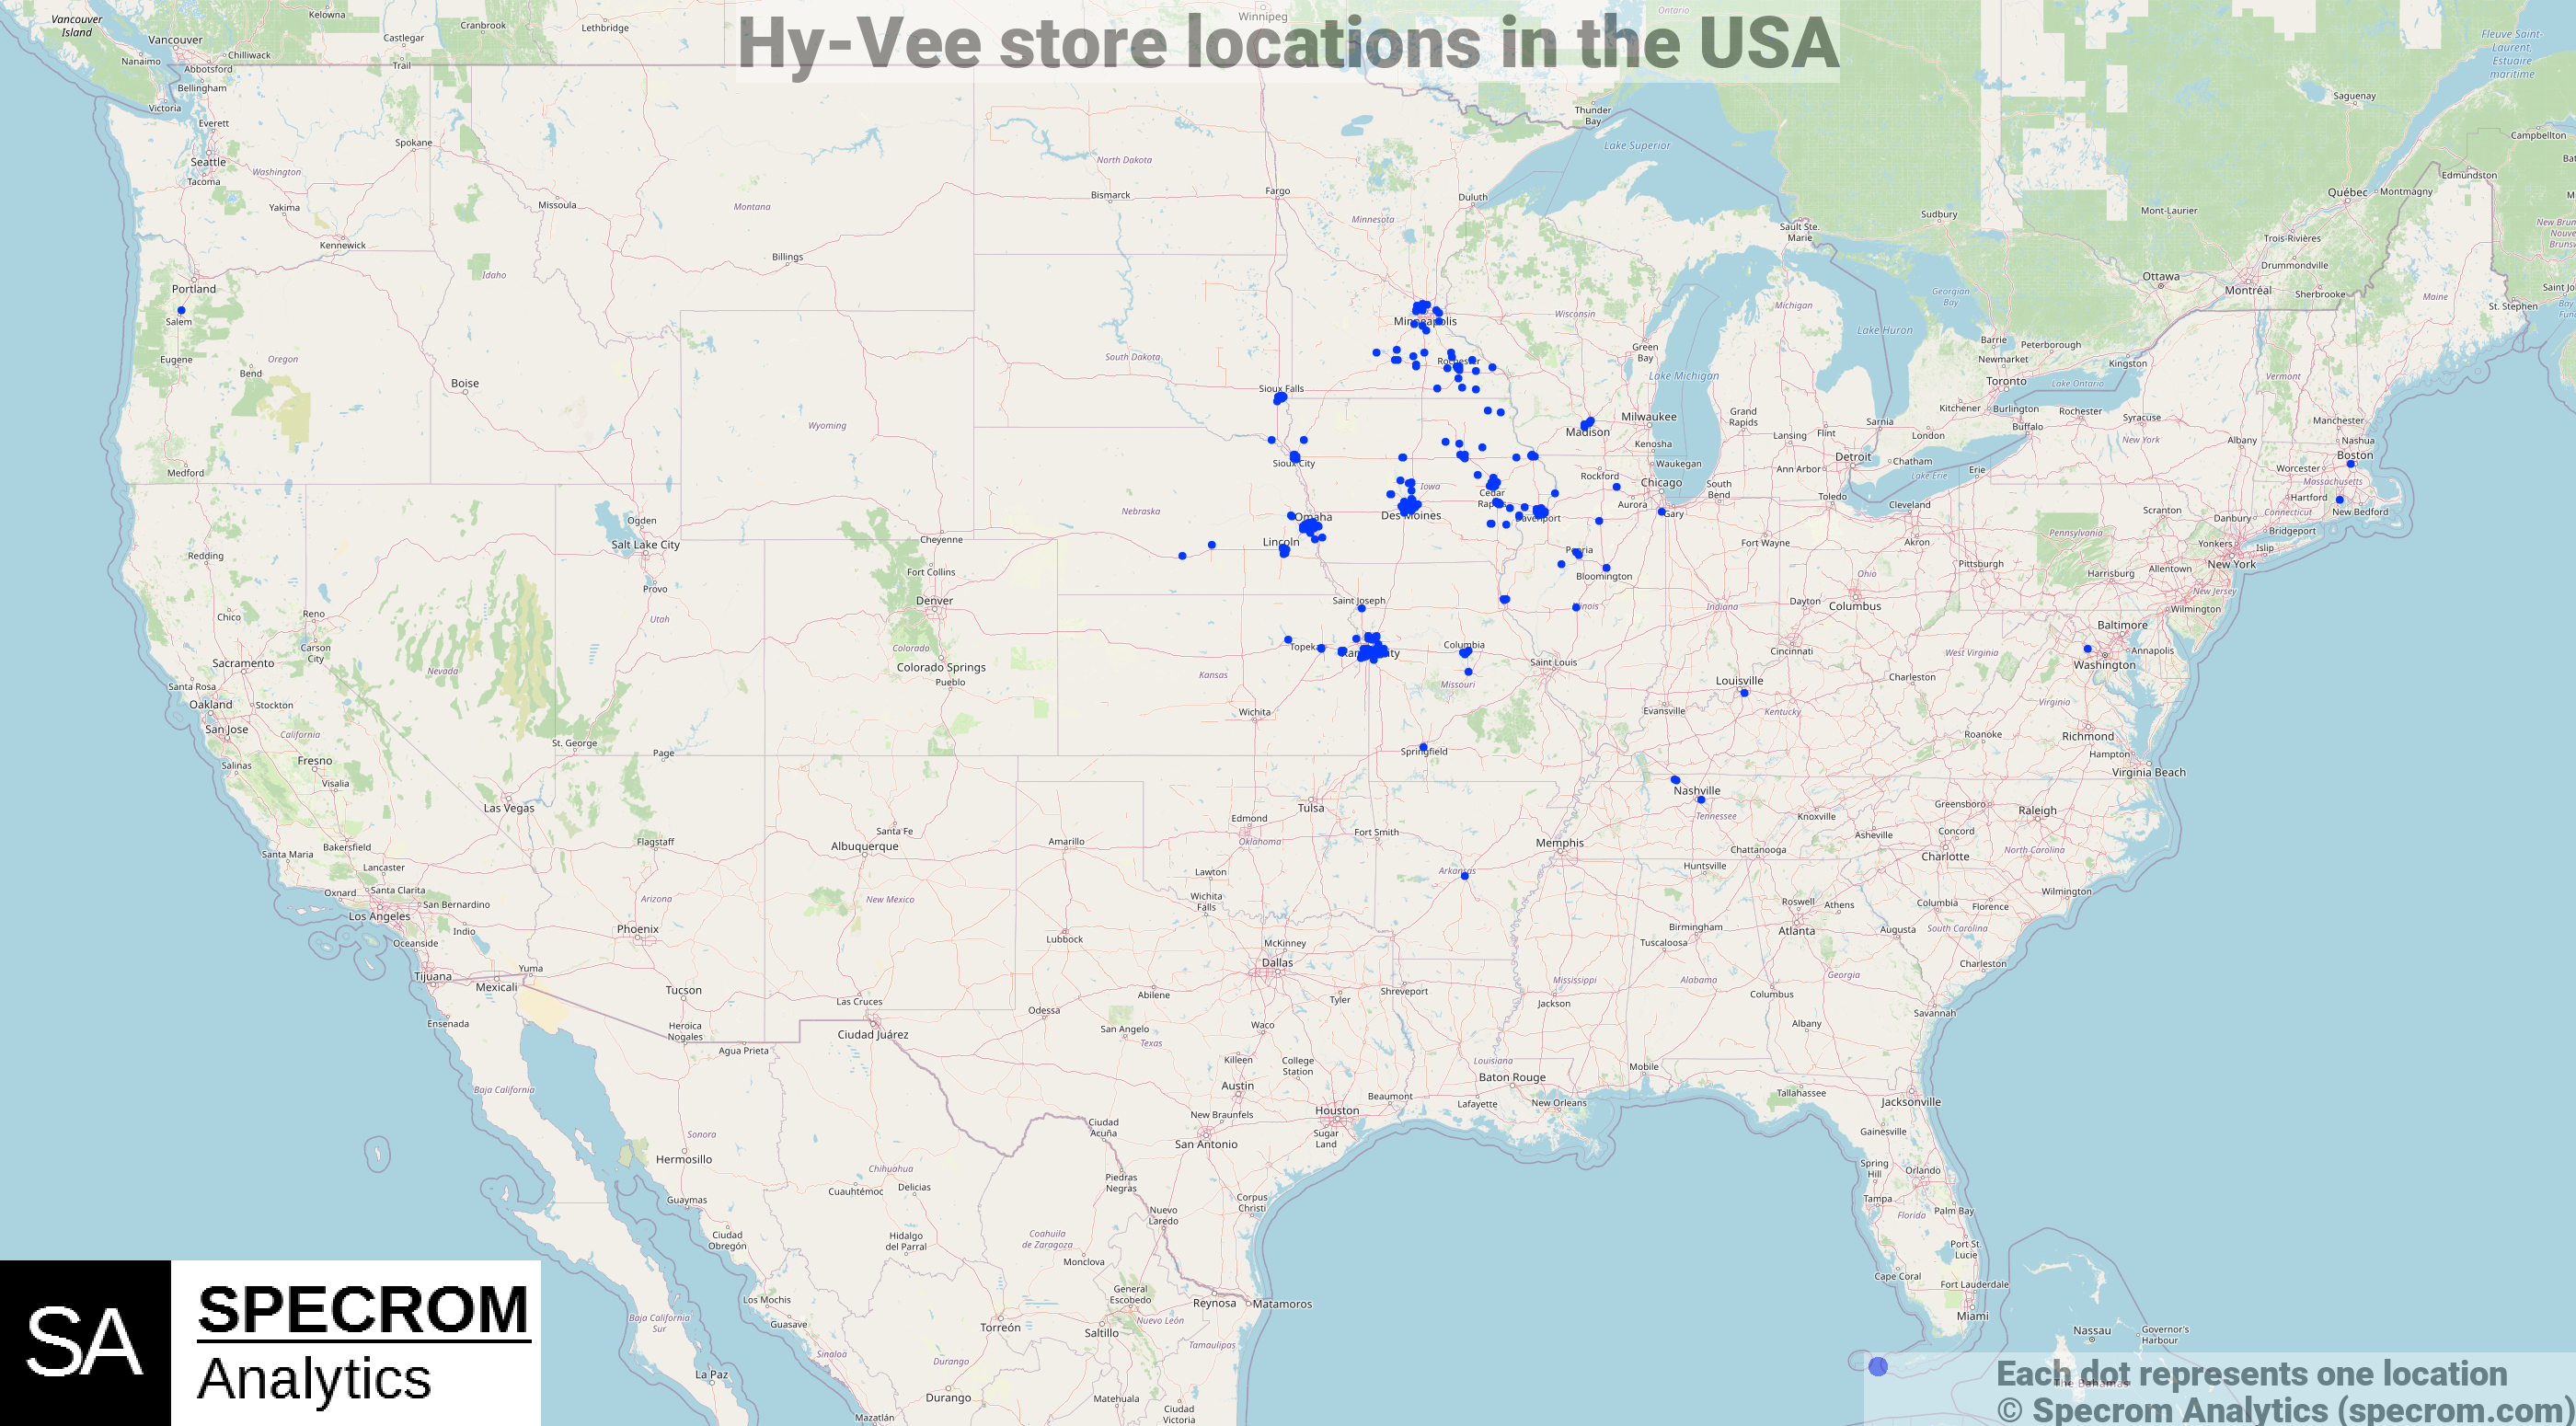 Hy-Vee store locations in the USA